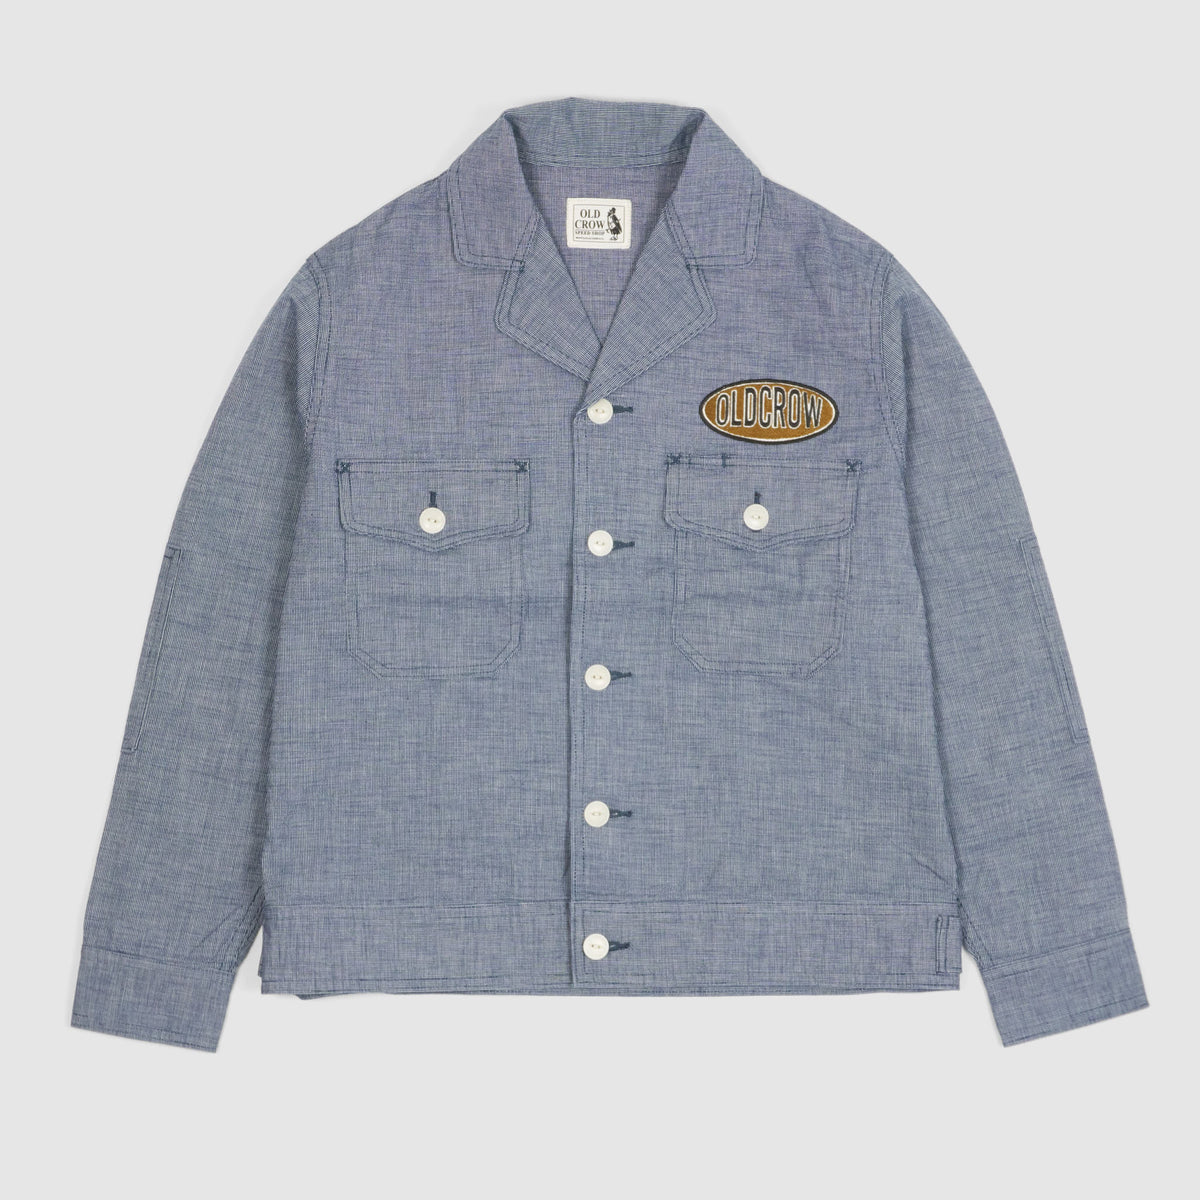 Old Crow Speed Shop by Glad Hand &amp; Co. Special Work Jacket